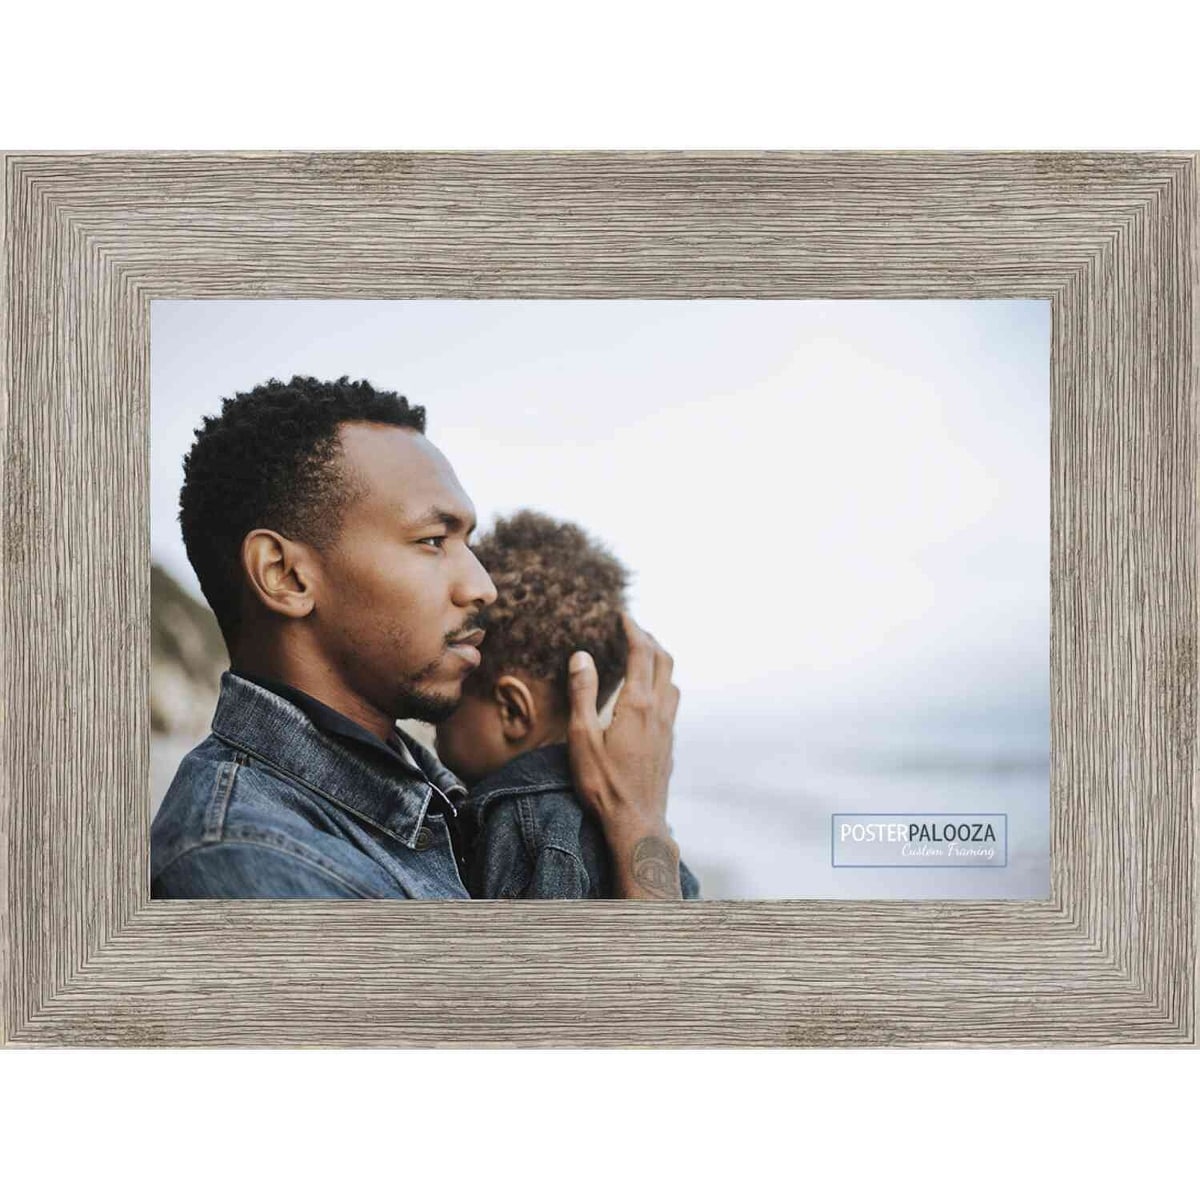 DesignOvation Kieva Solid Wood Picture Frames, Distressed Gray 11x14 Matted to 8x10, Pack of 4